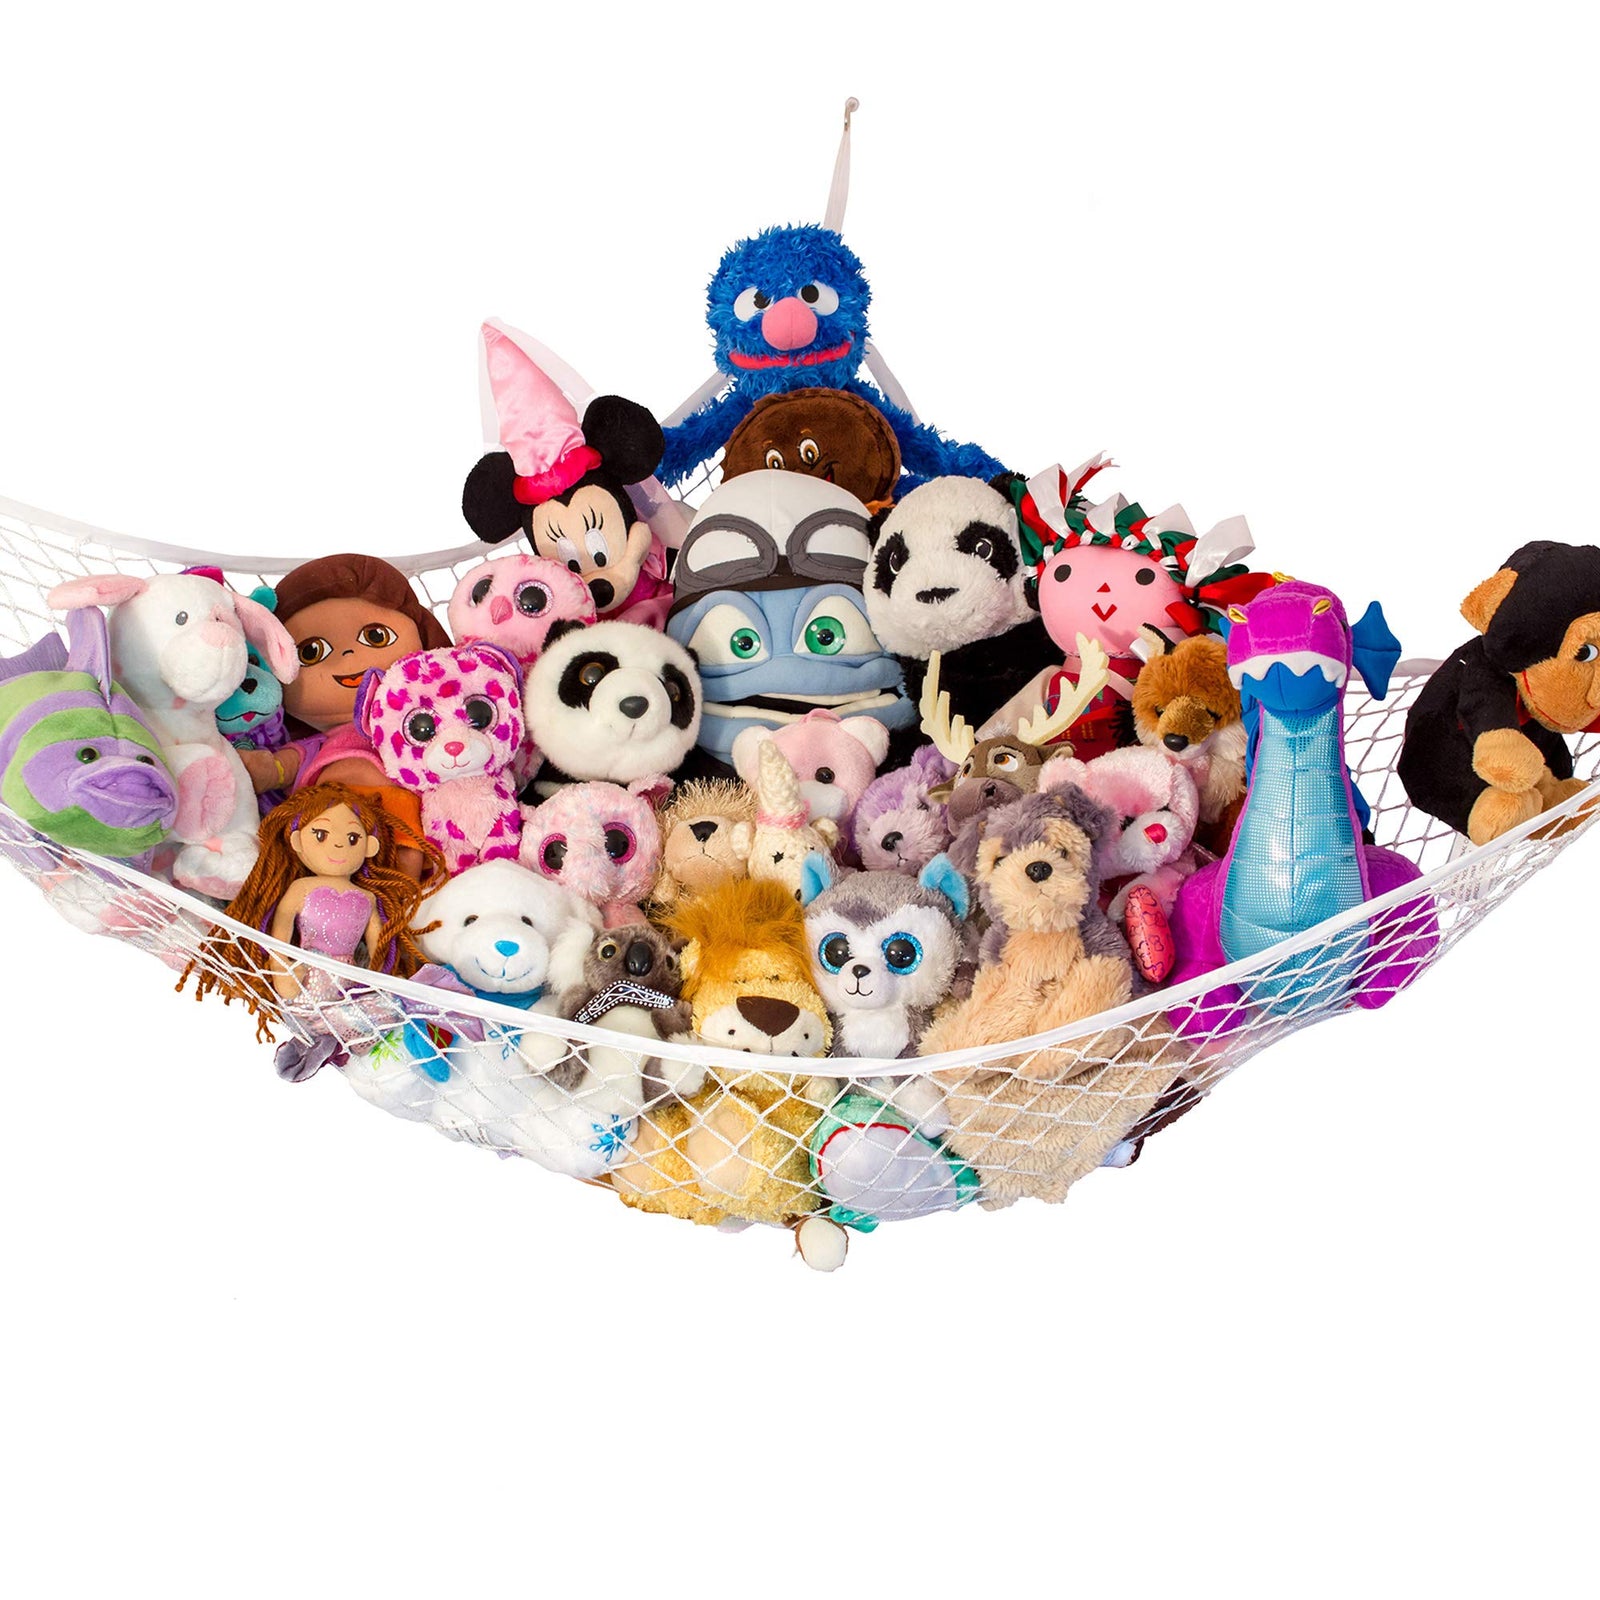 Lilly's Love Stuffed Animal Storage Hammock - Large "STUFFIE Party Hammock" - Organize Stuffed Animals and Children's Toys with this Stuffed Animal Net